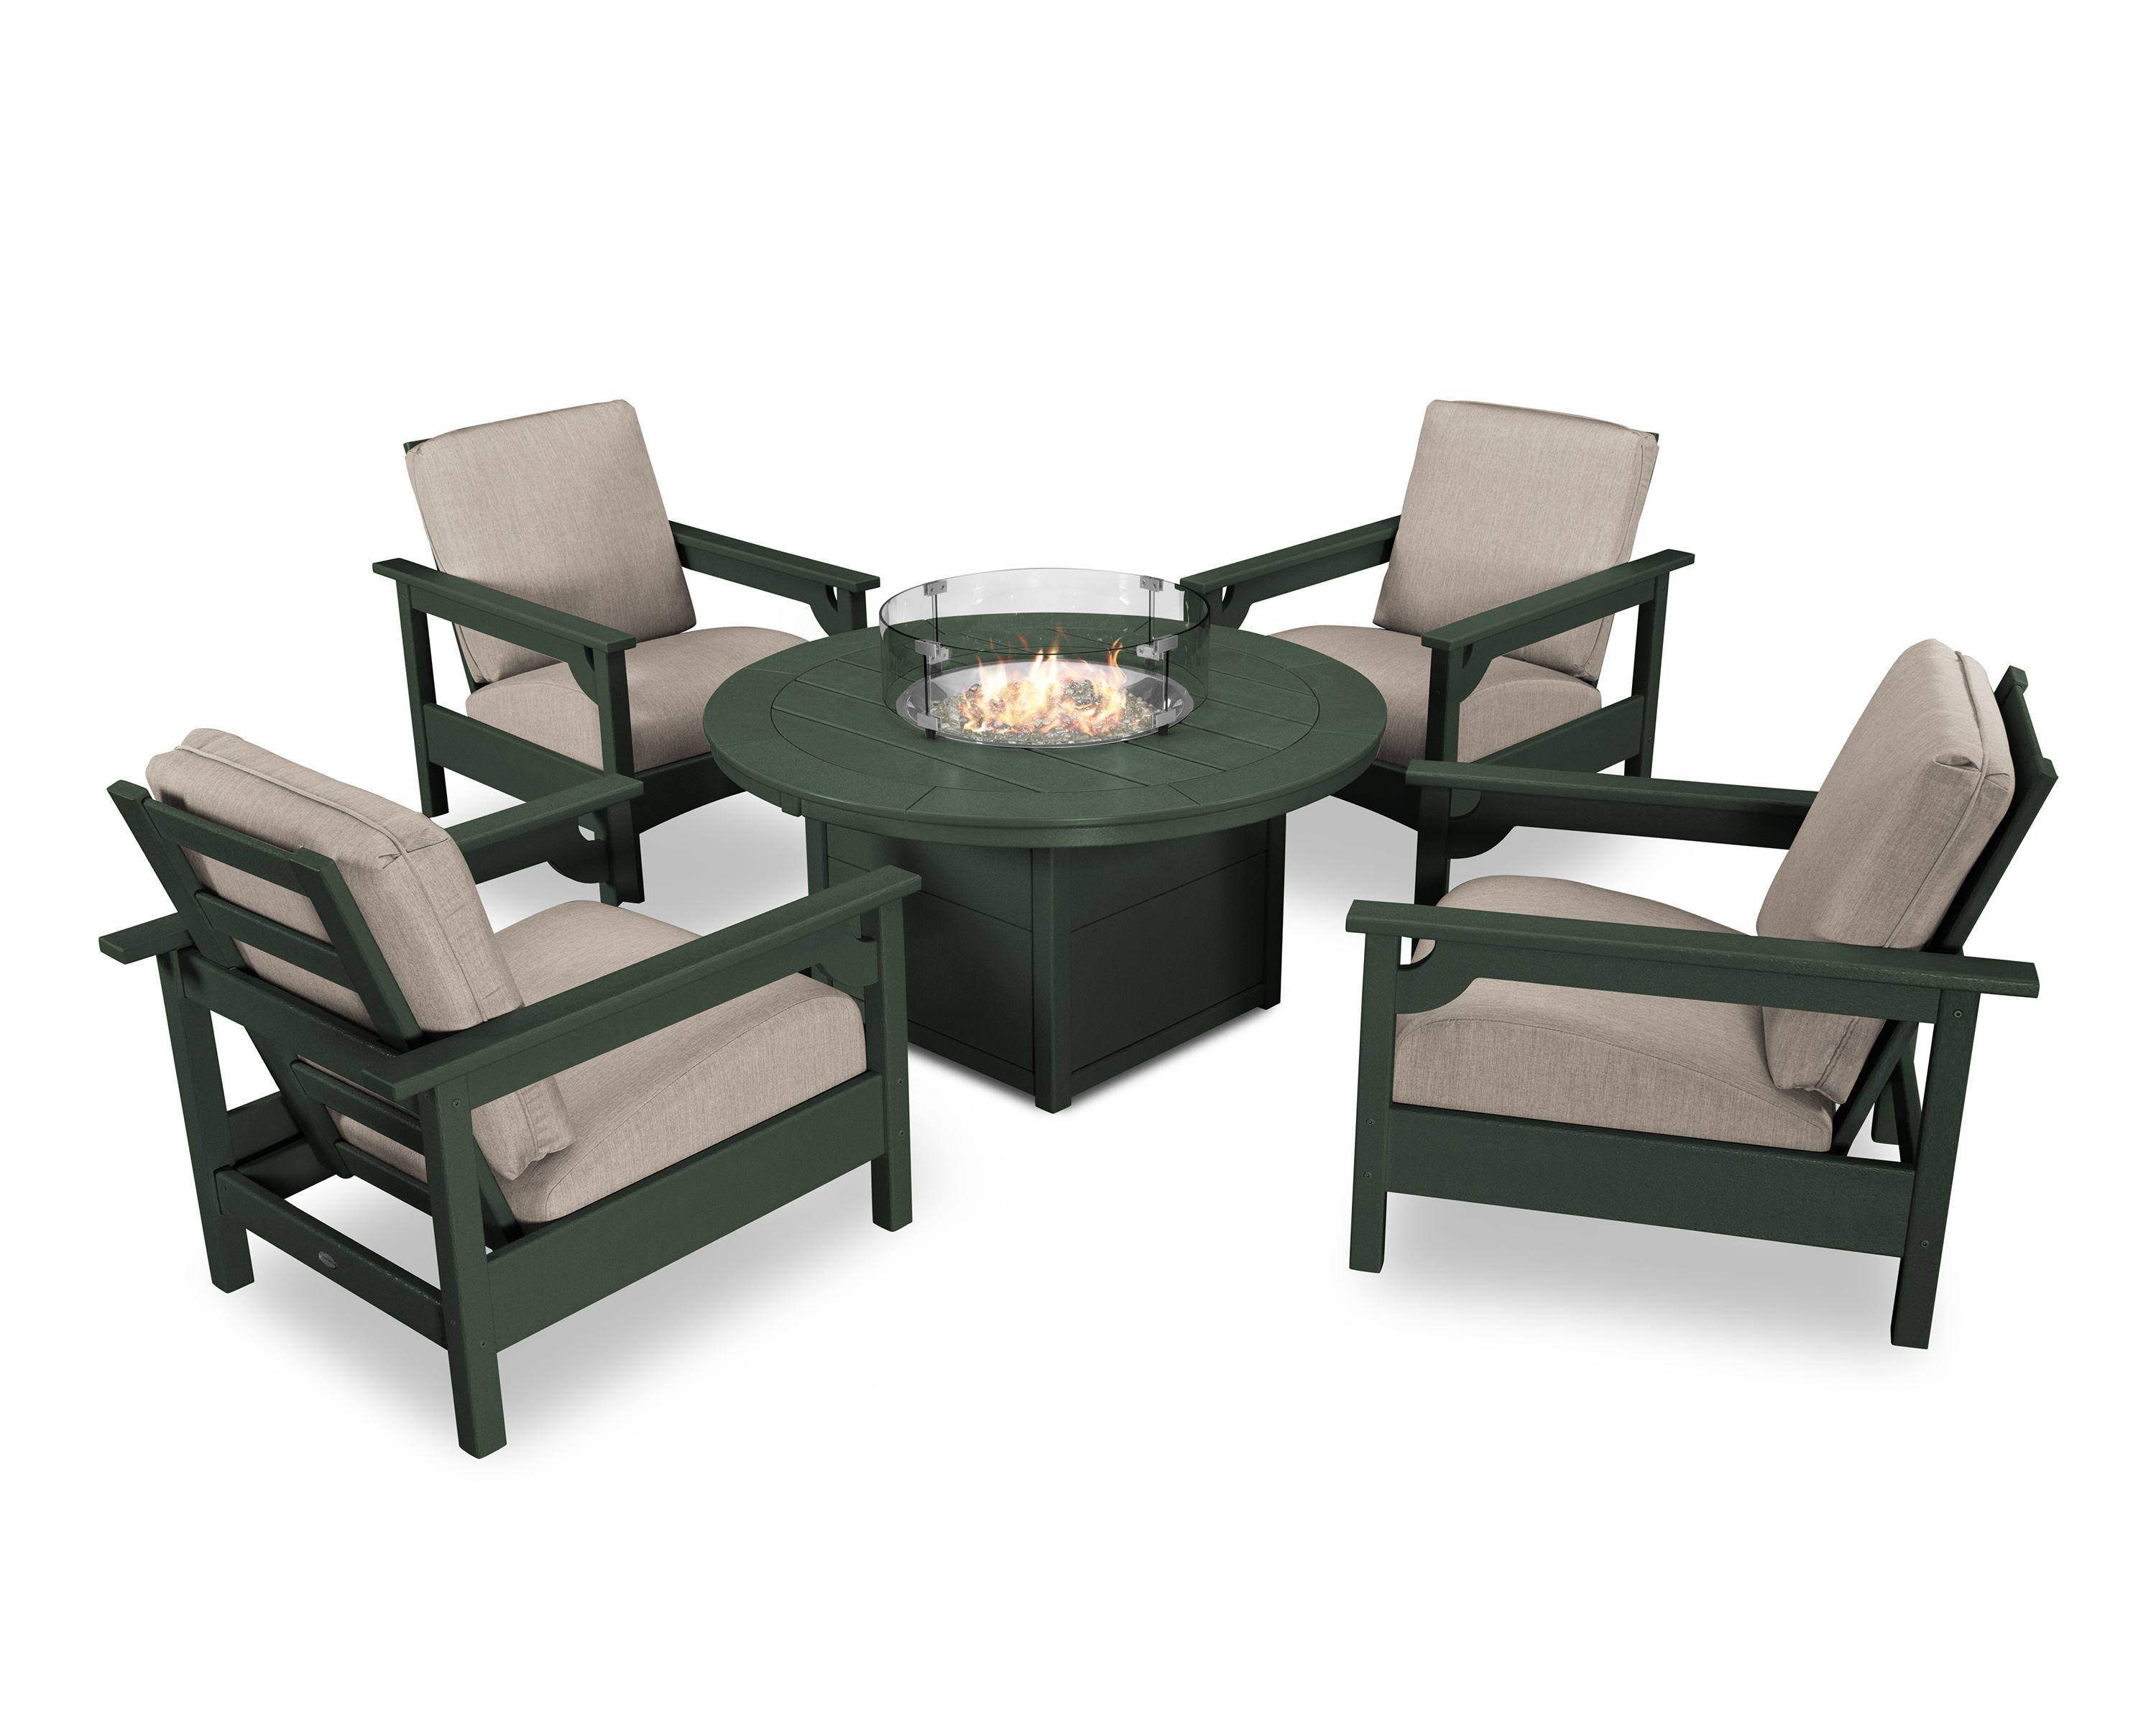 club 5-piece conversation set with fire pit table in green / cast ash product image